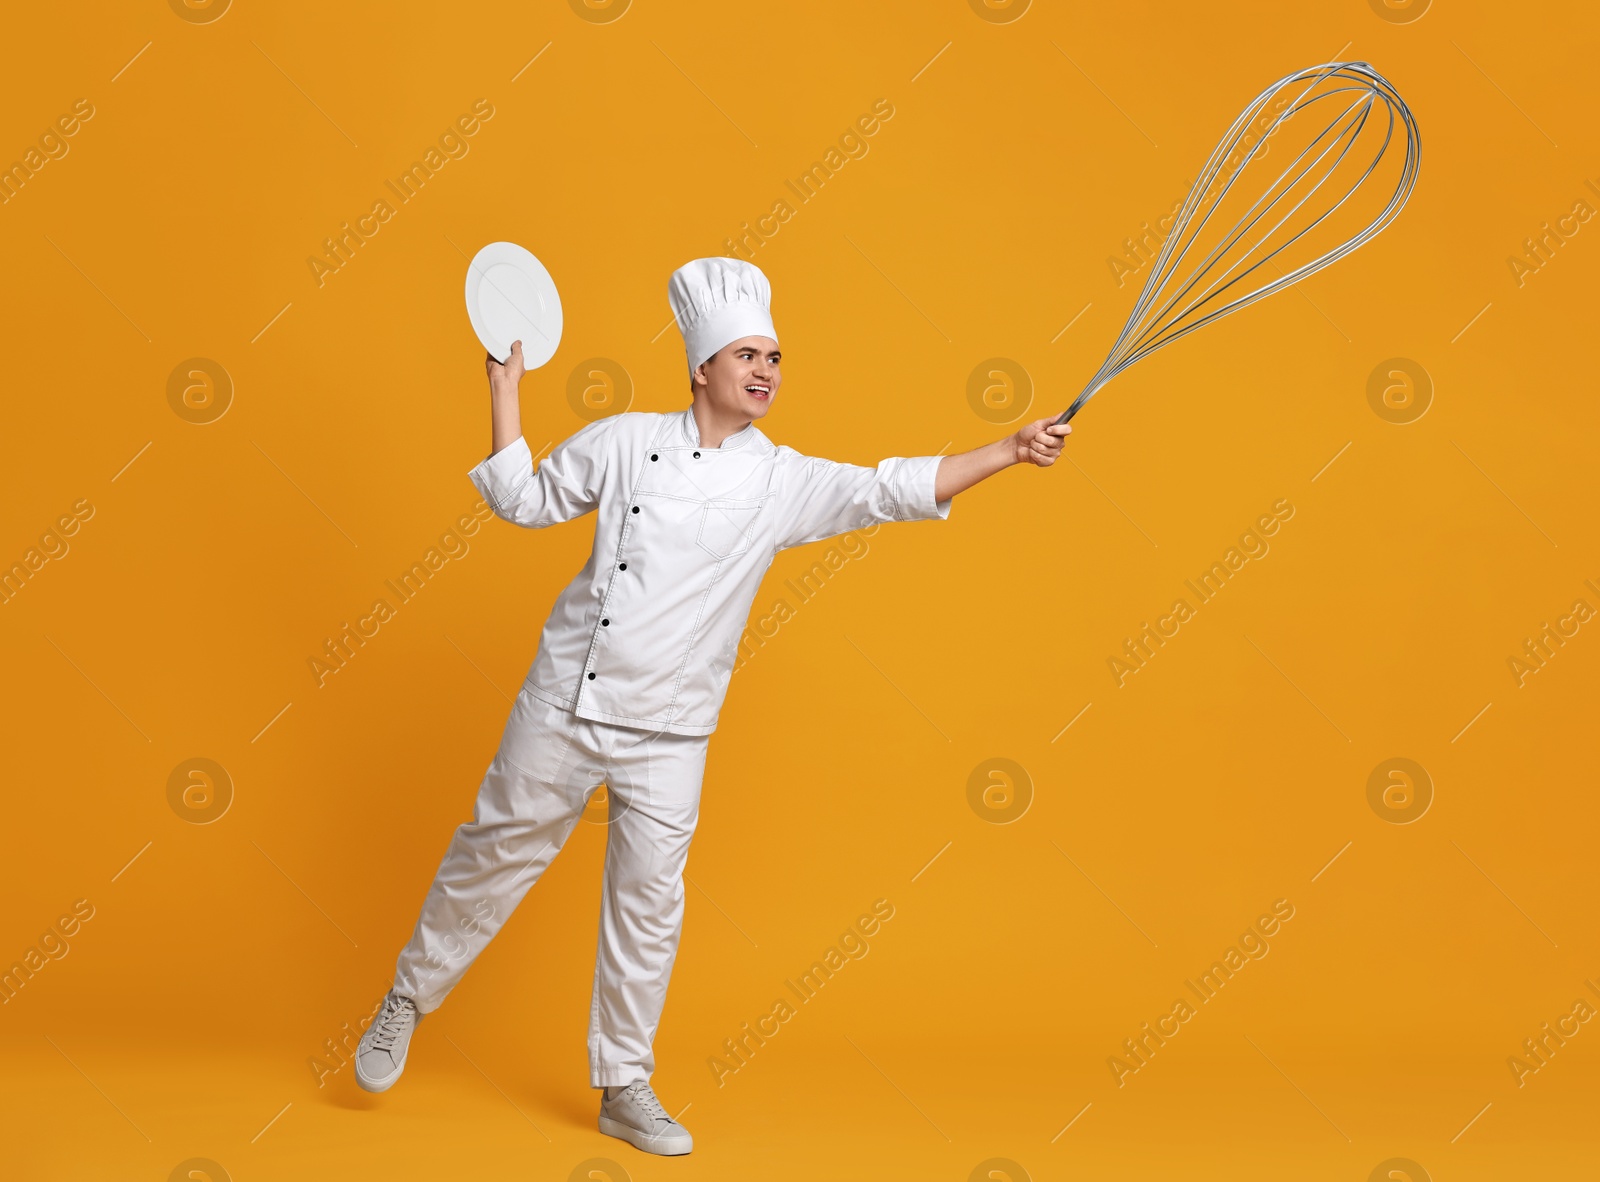 Image of Pastry chef with big whisk and plate on orange background